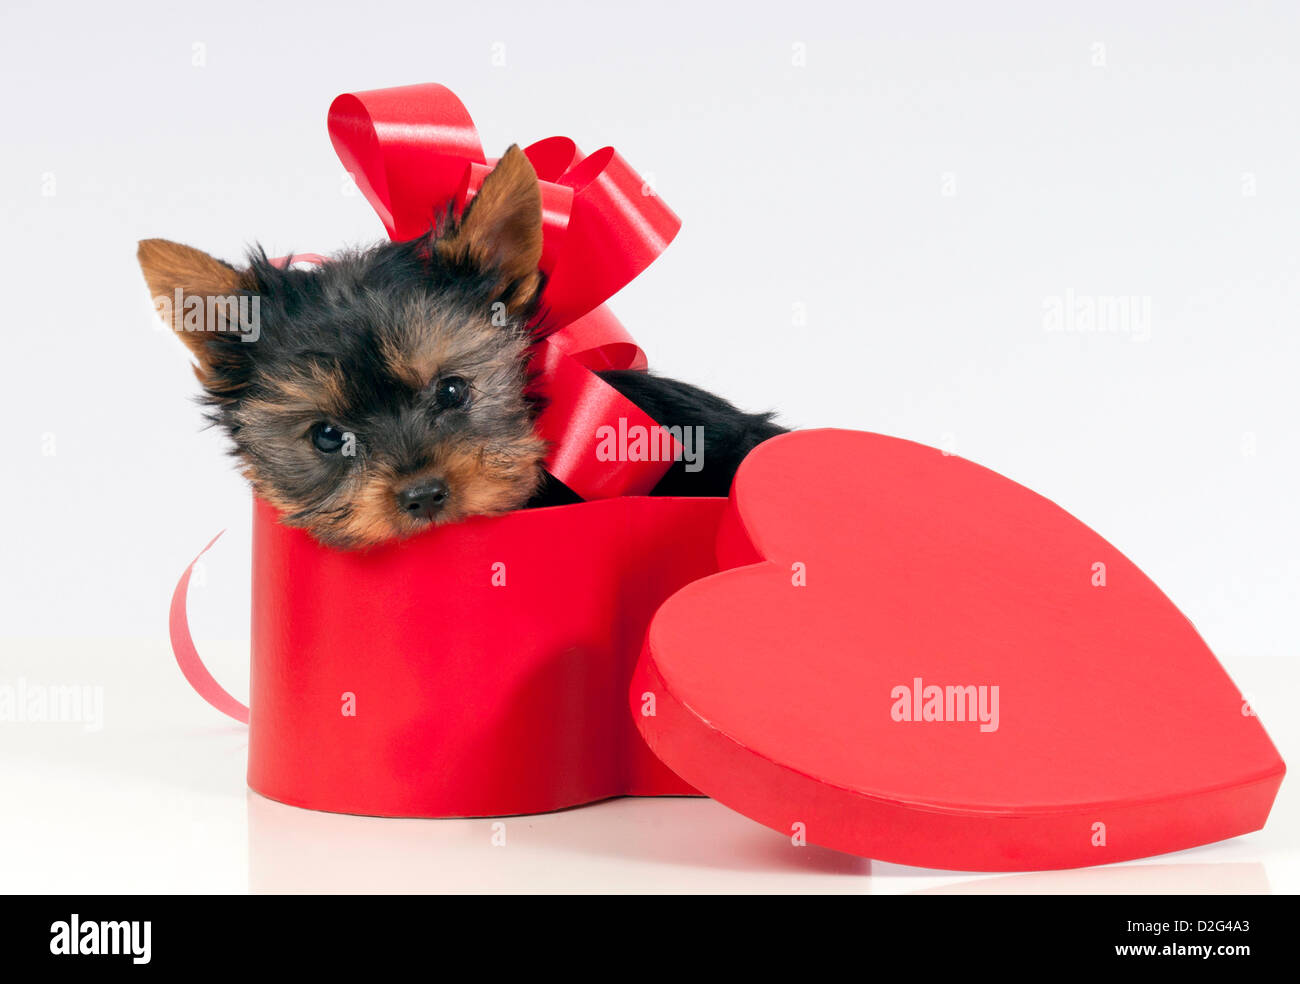 Cute yorkie puppy in a heart shaped gift box. Stock Photo